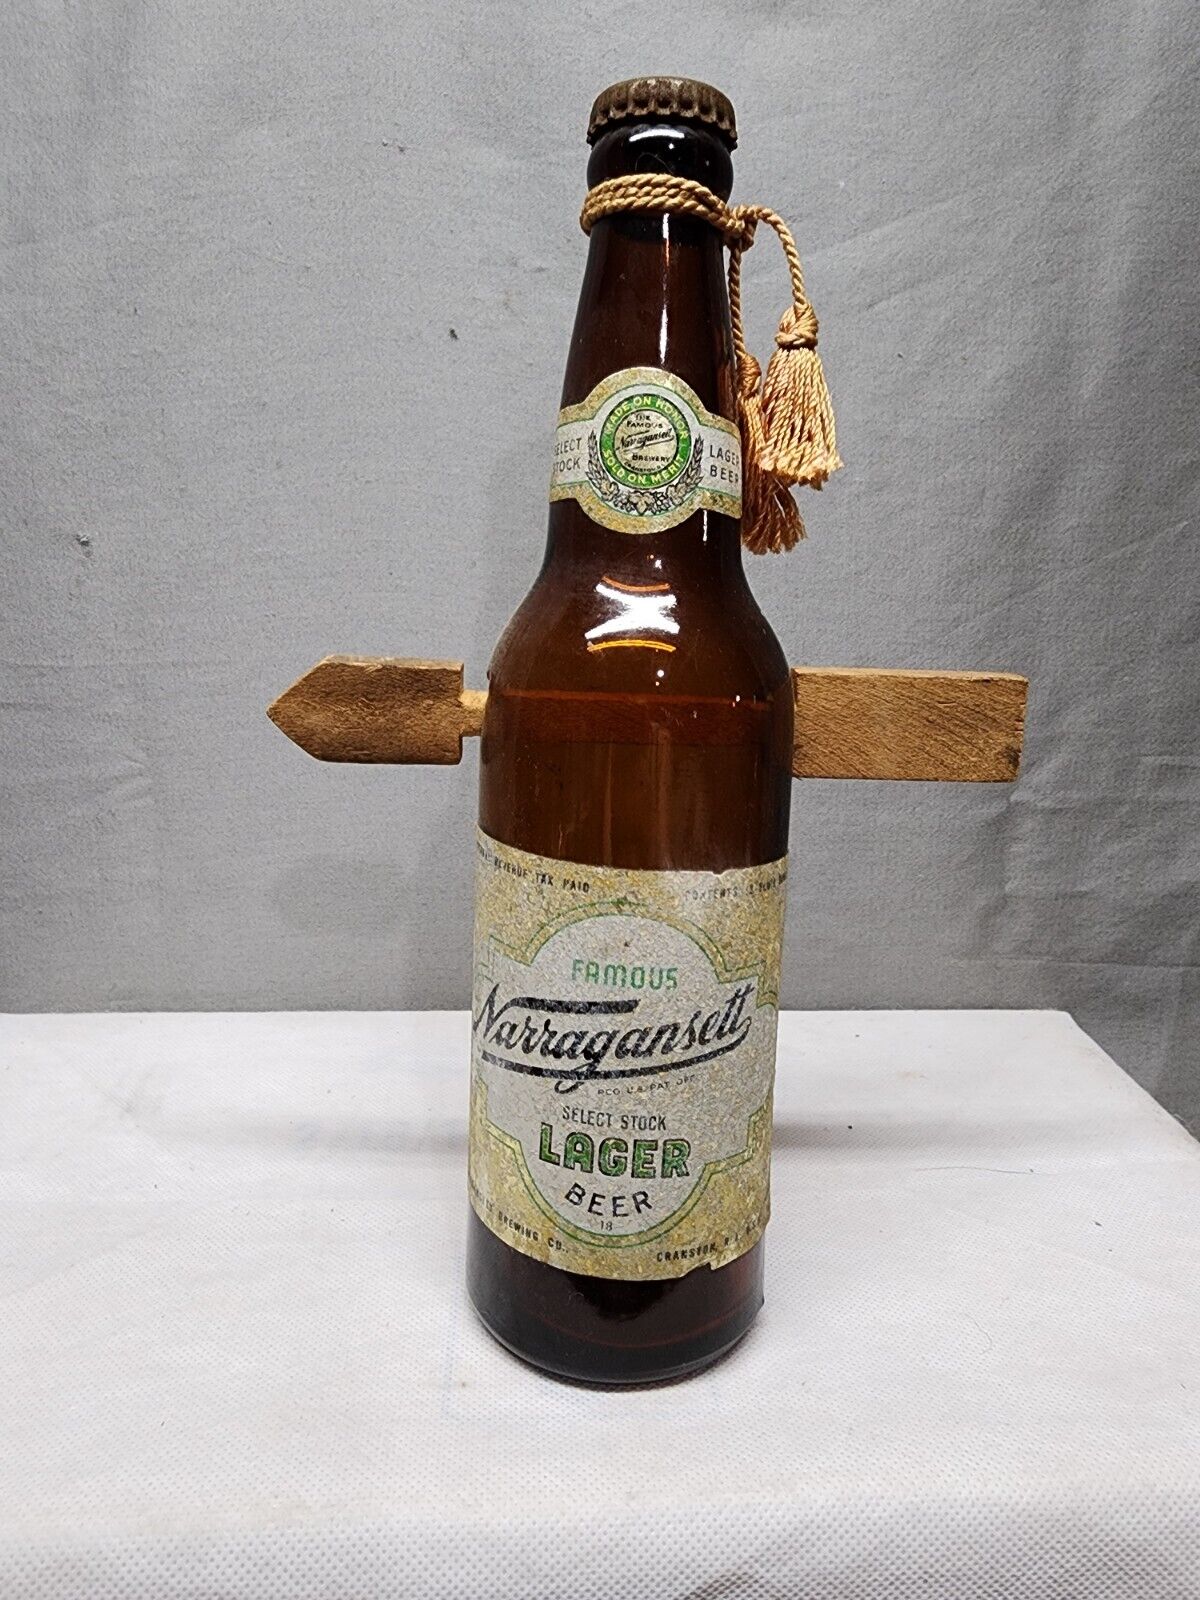 Vintage Rare Narragansett Select Stock Lager Beer Bottle With Wooden Arrow Sign